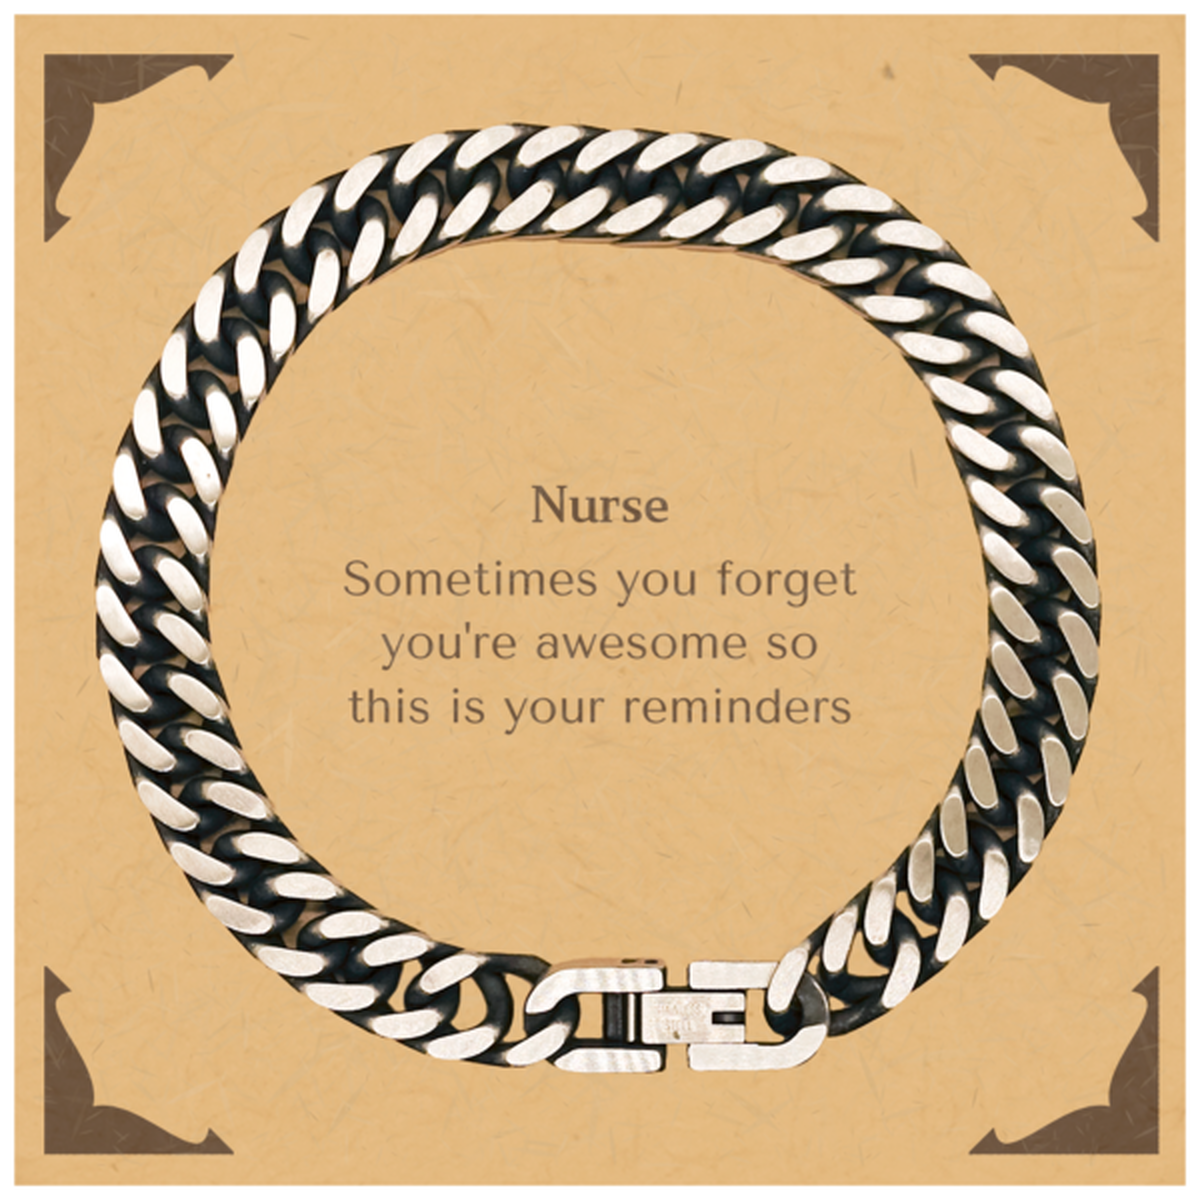 Sentimental Nurse Cuban Link Chain Bracelet, Nurse Sometimes you forget you're awesome so this is your reminders, Graduation Christmas Birthday Gifts for Nurse, Men, Women, Coworkers